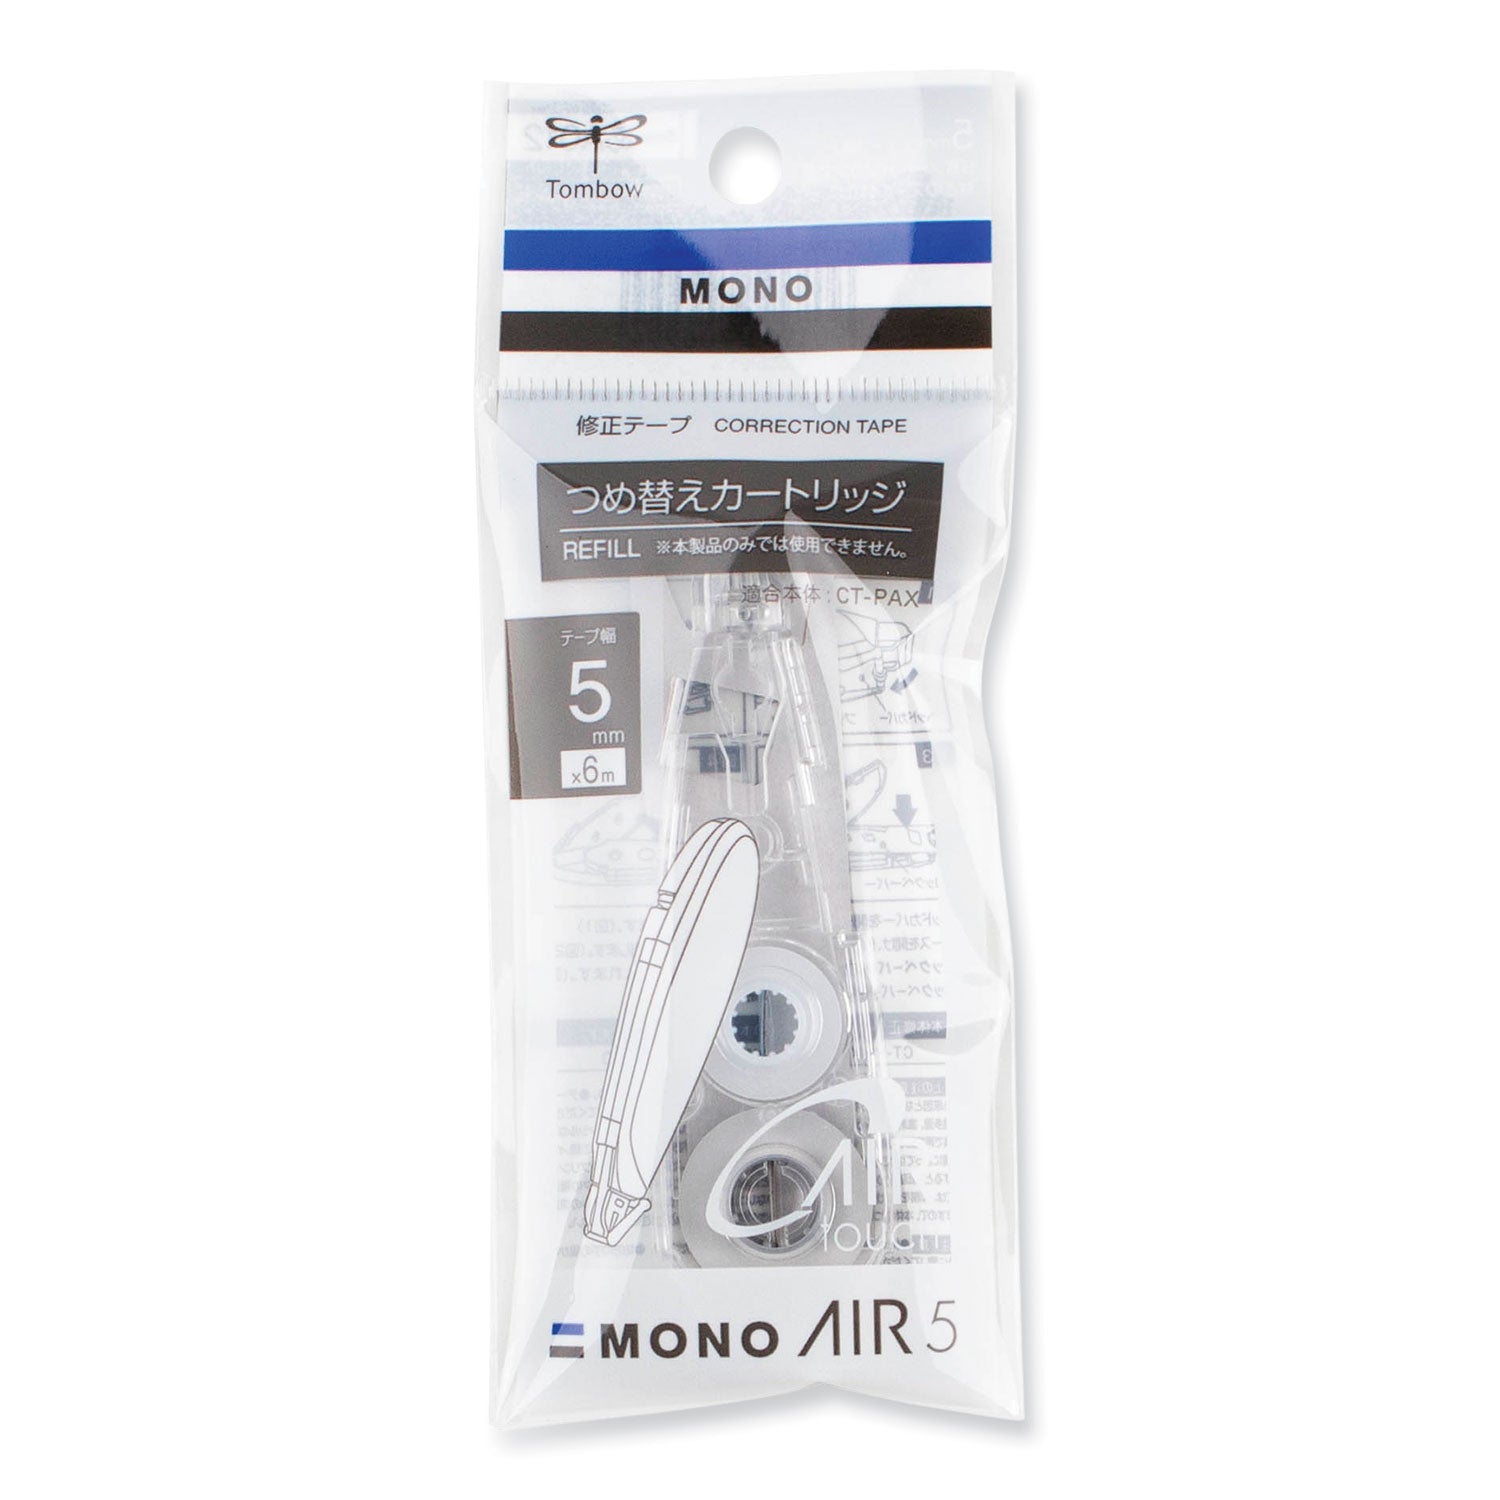 mono-air-pen-type-correction-tape-refill-clear-applicator-019-x-236_tom68697 - 1